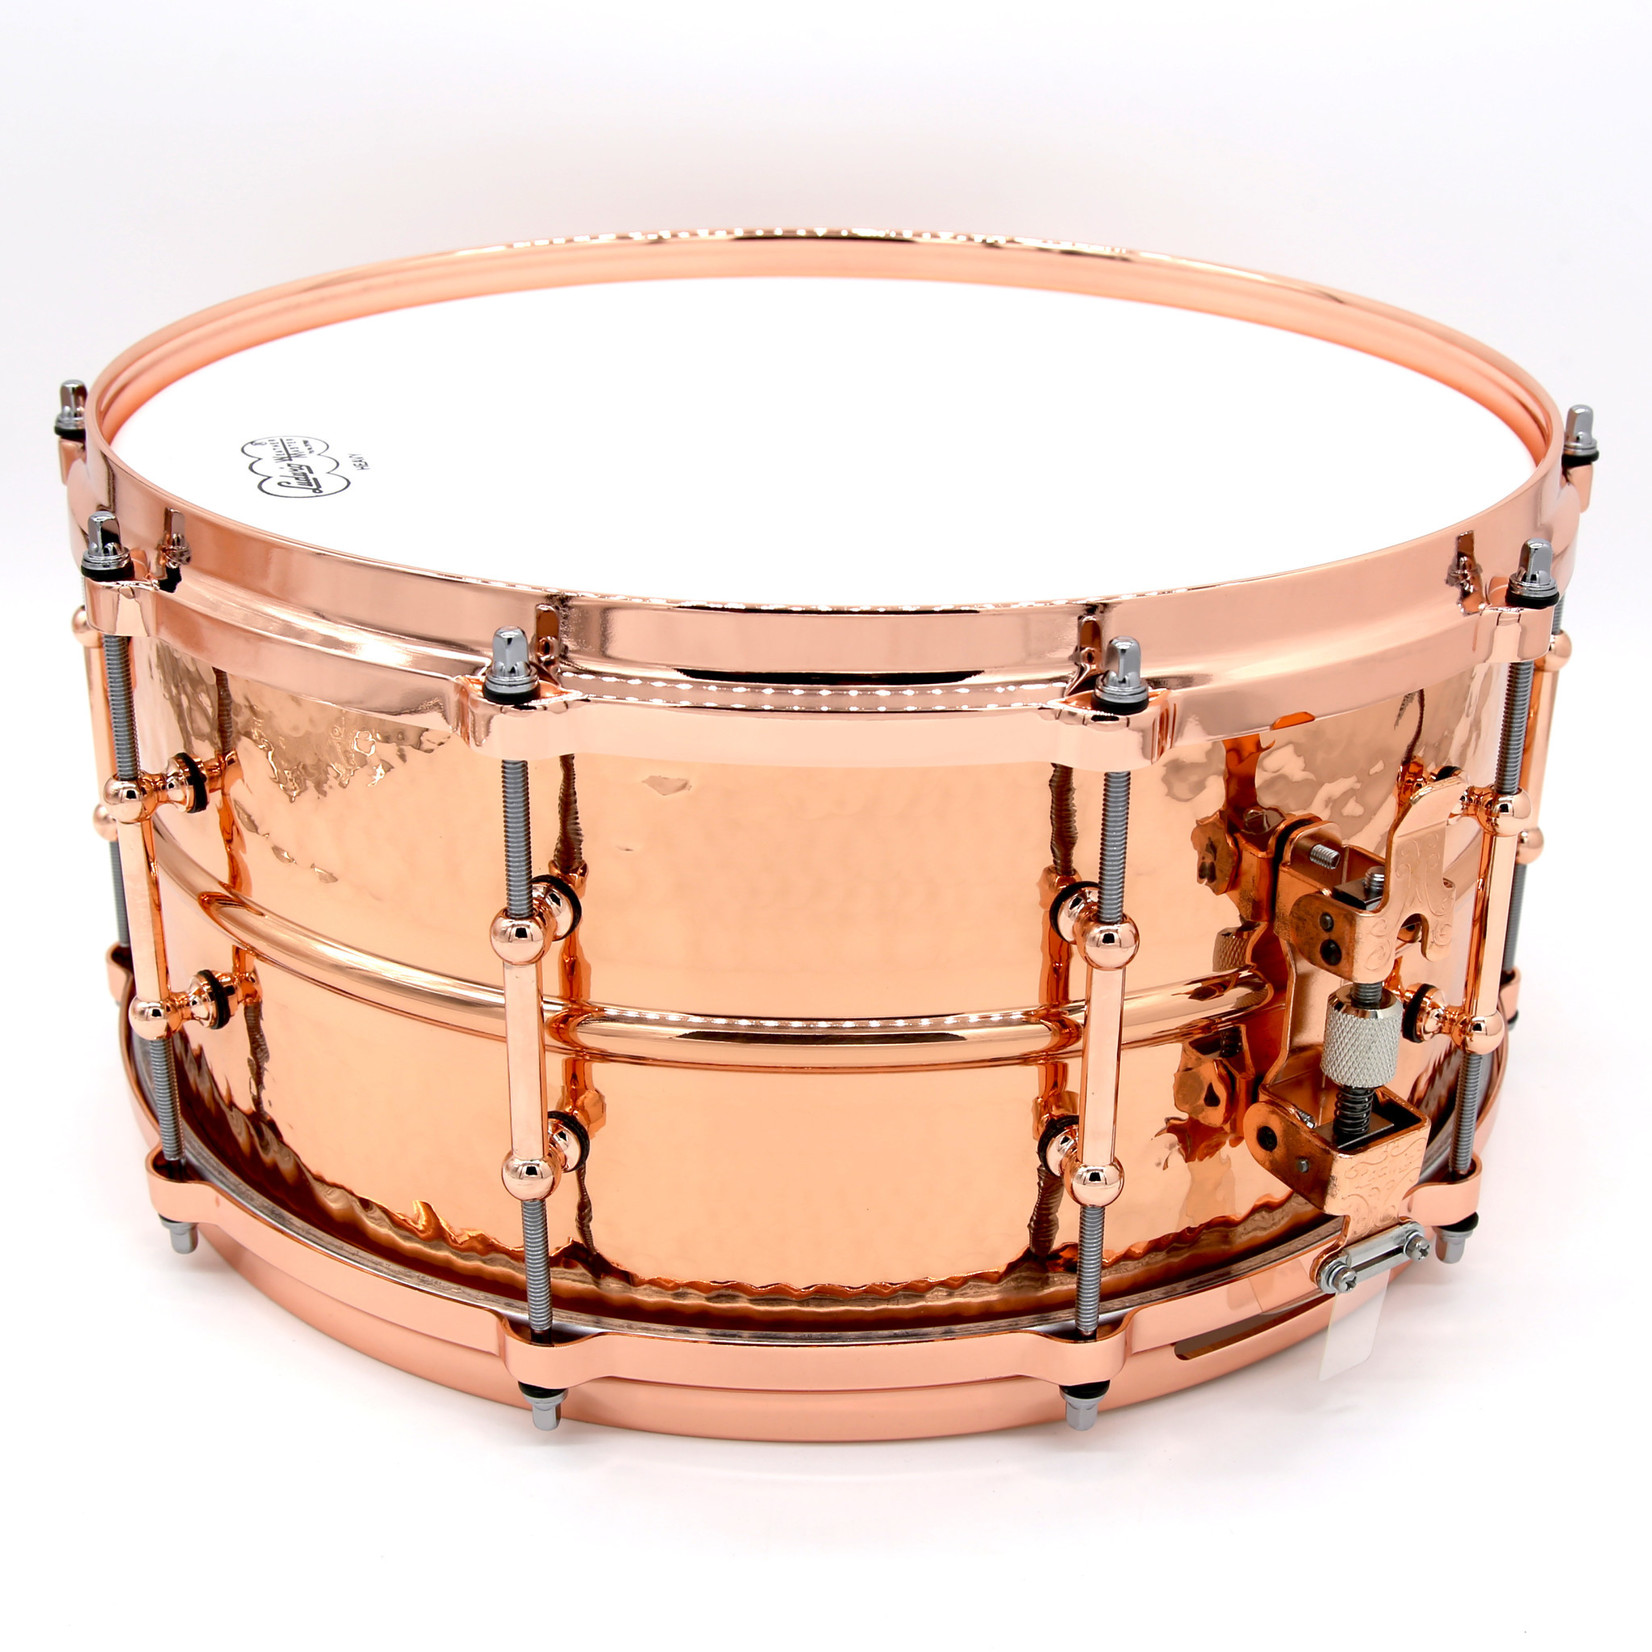 Ludwig Ludwig 6.5x14" Copperphonic Hammered With Tube Lugs And Copper Hardware LC662KTC